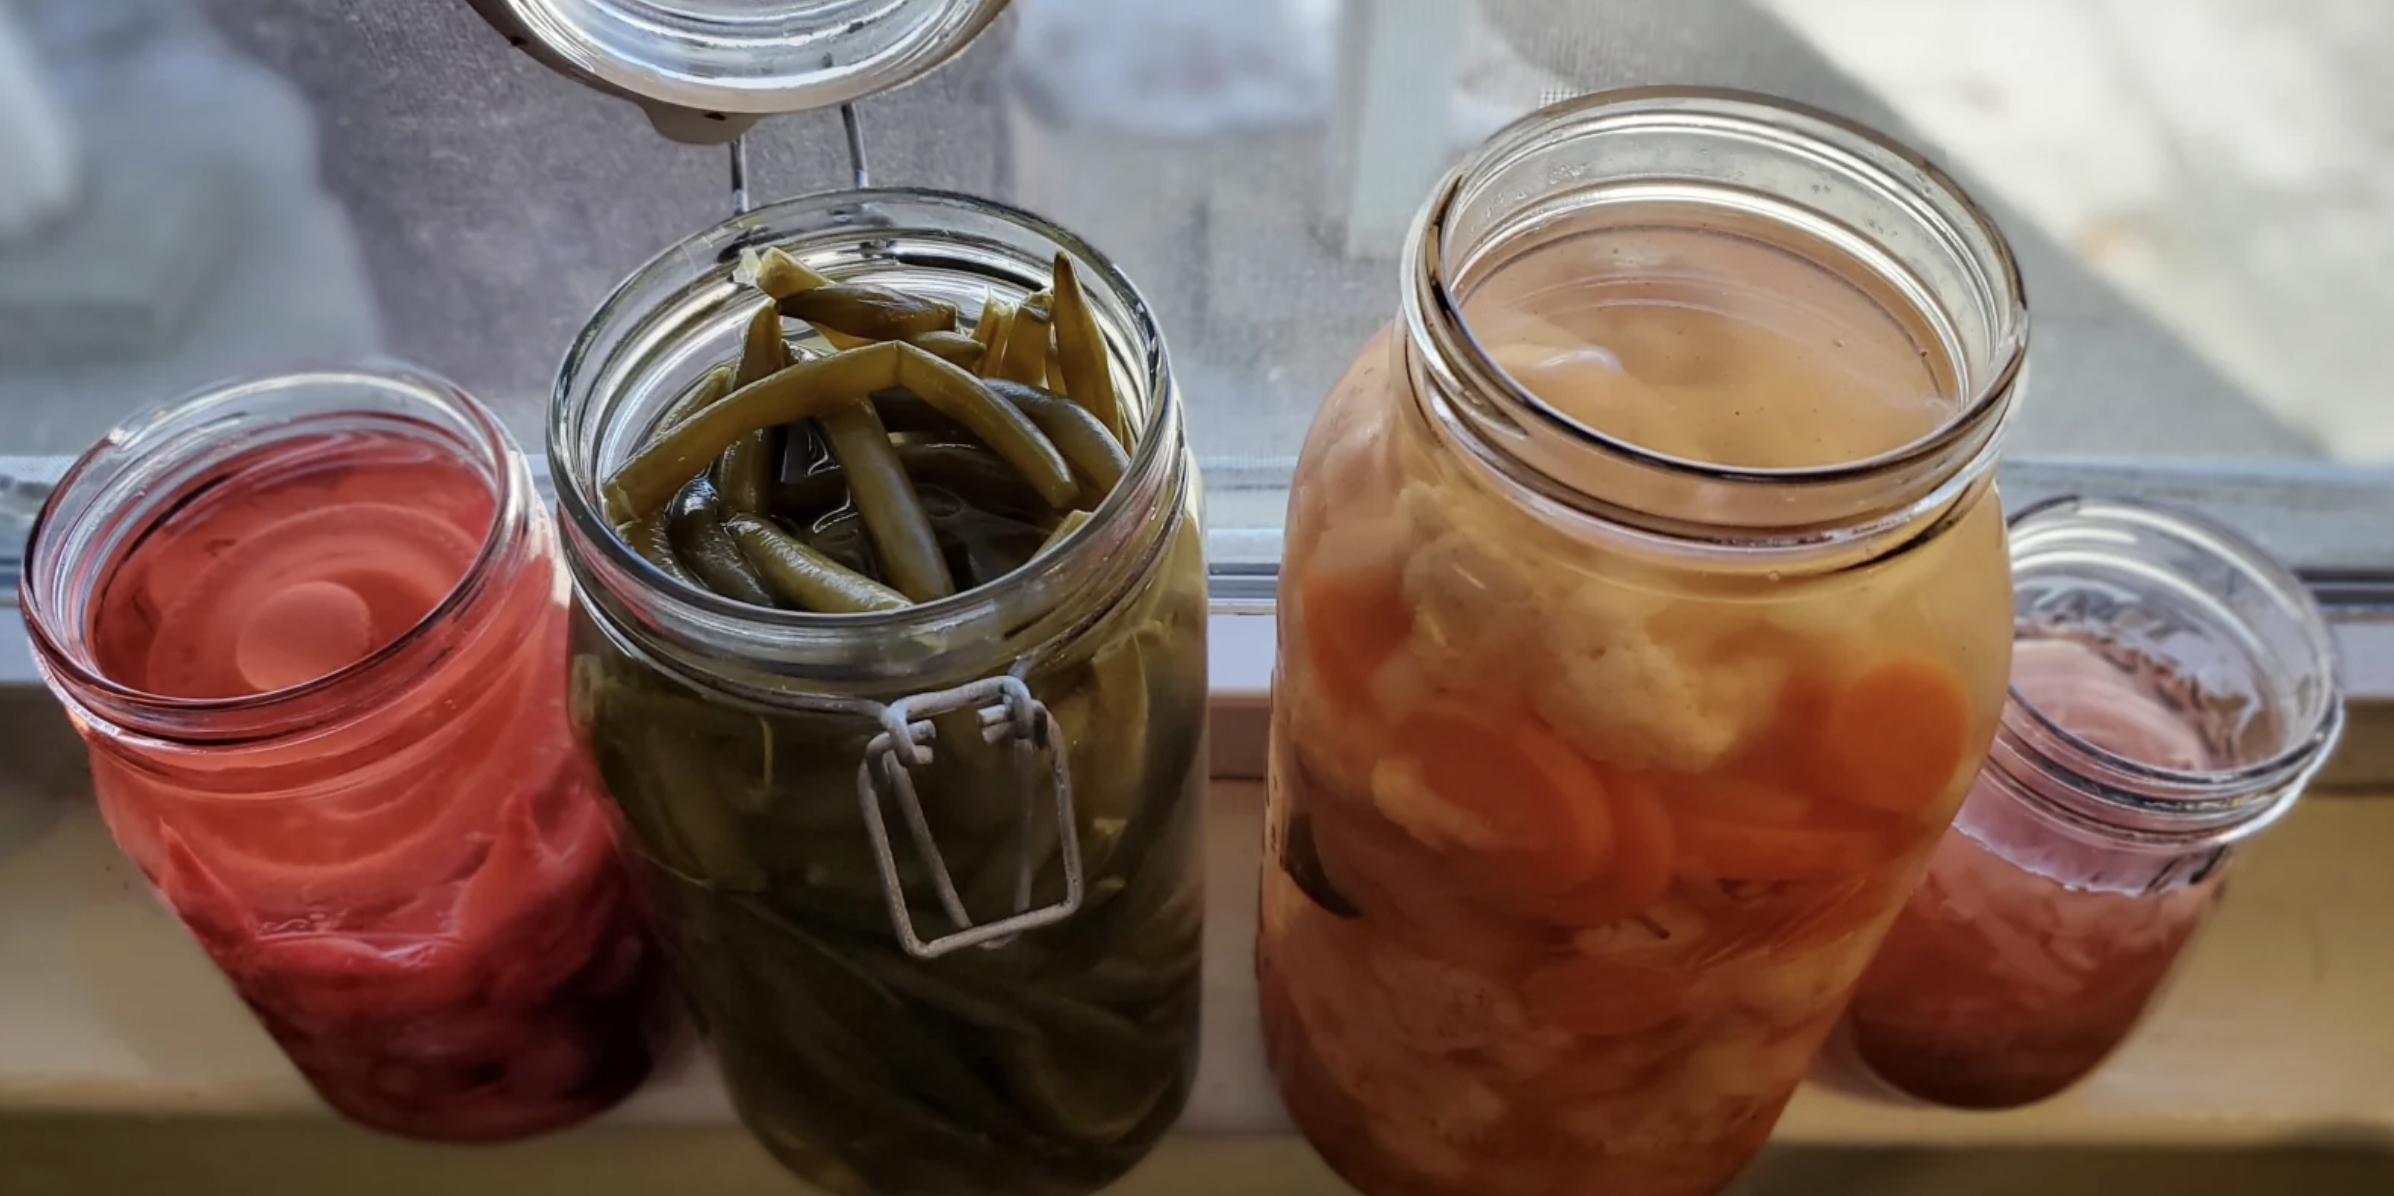 How to Ferment Your Own Pickles Without Freaking Out